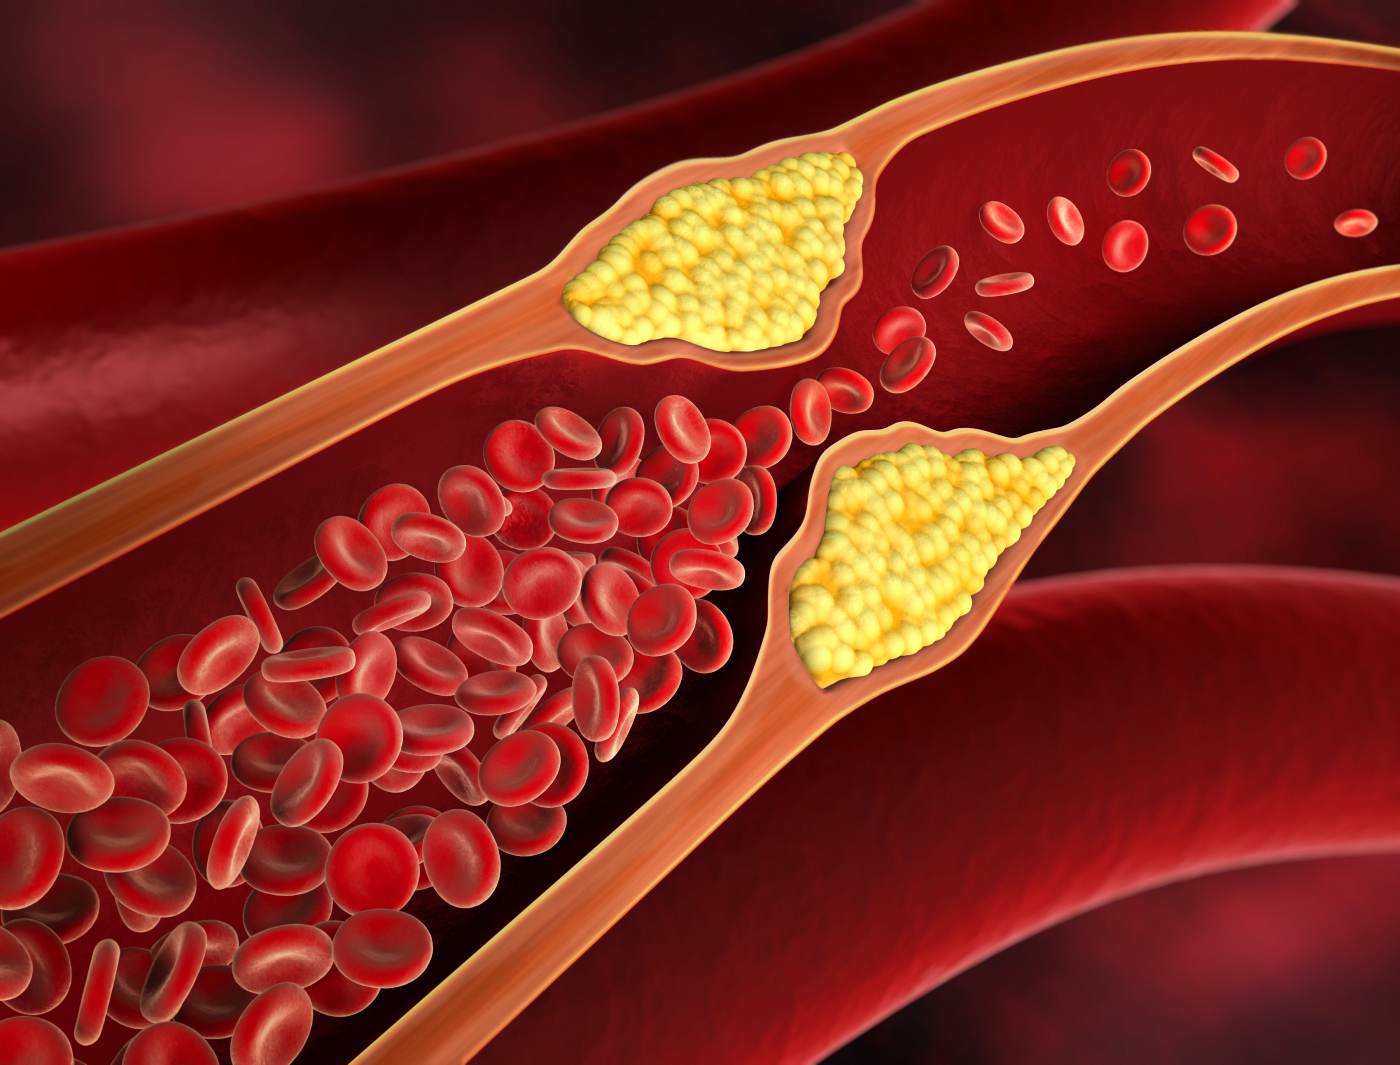 High cholesterol can affect the fertility of both men and women